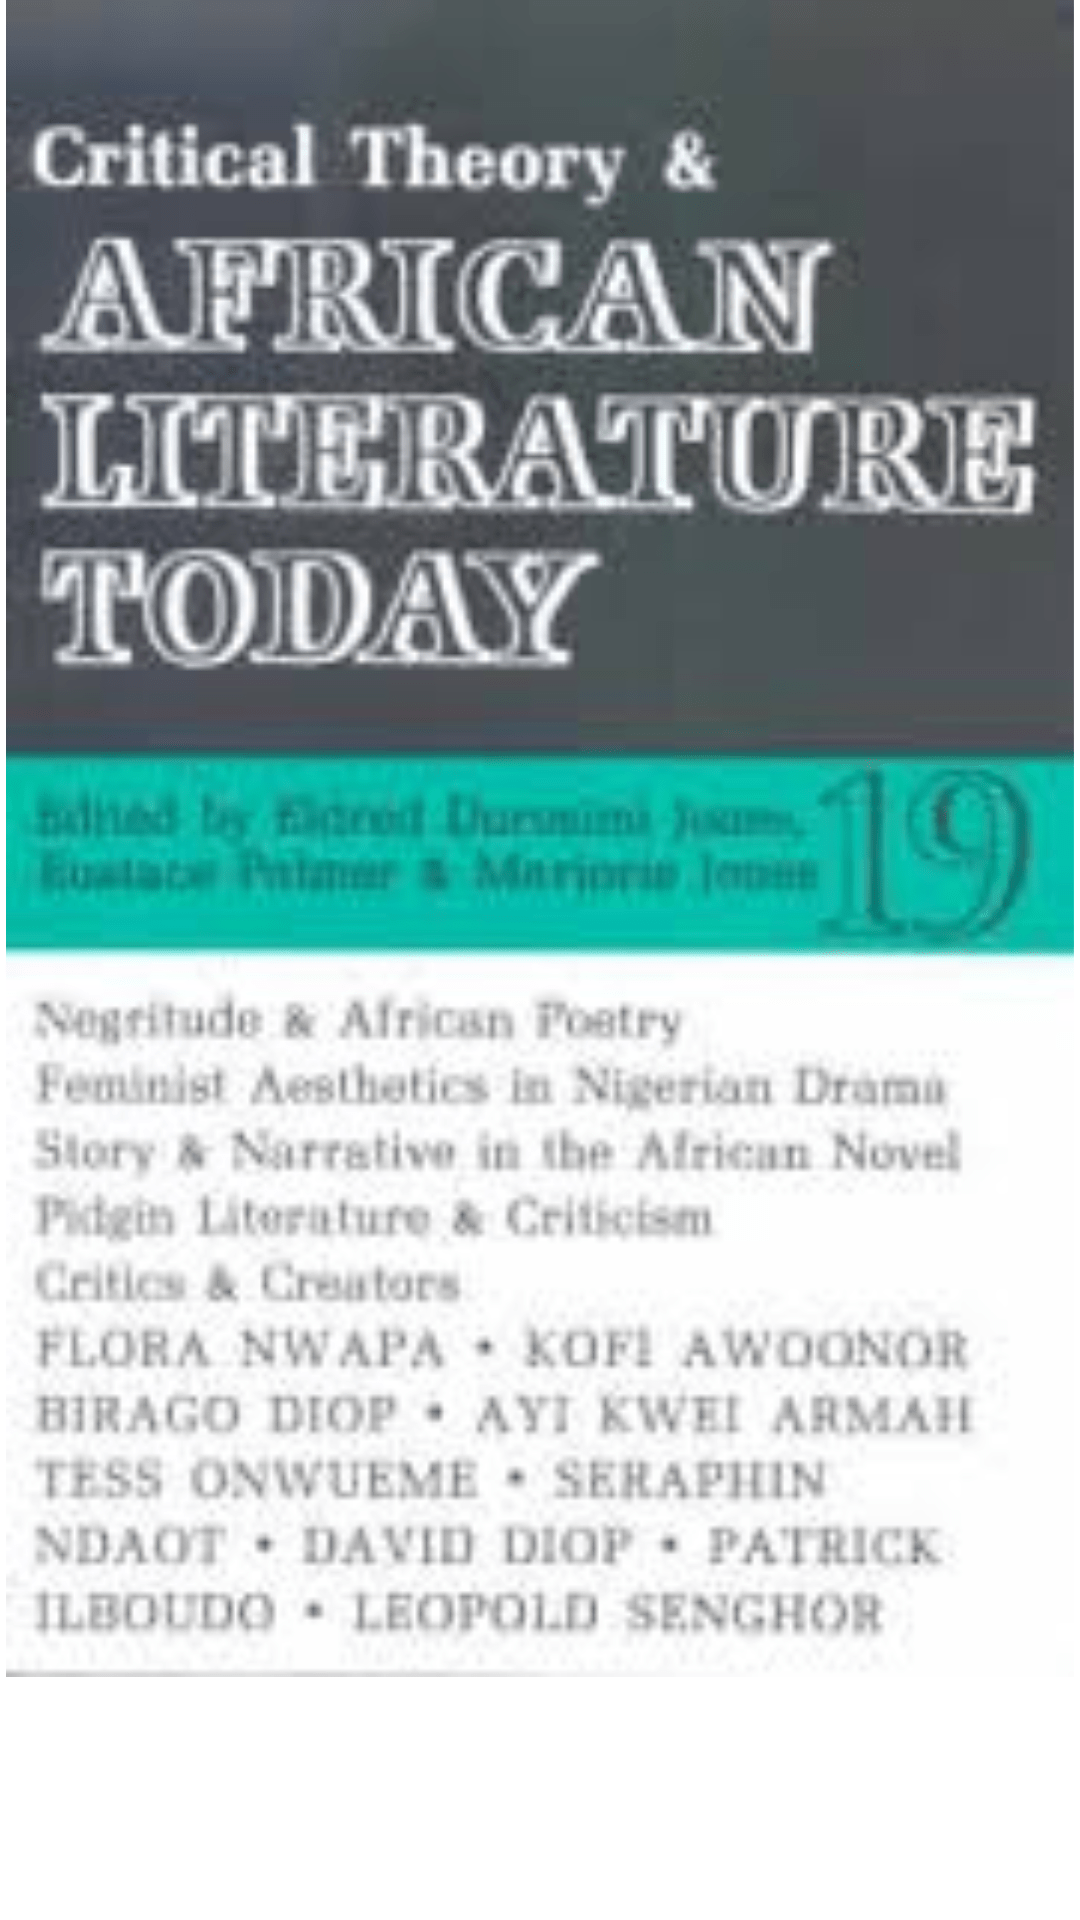 Critical Theory & African Literature Today: A Review: 19